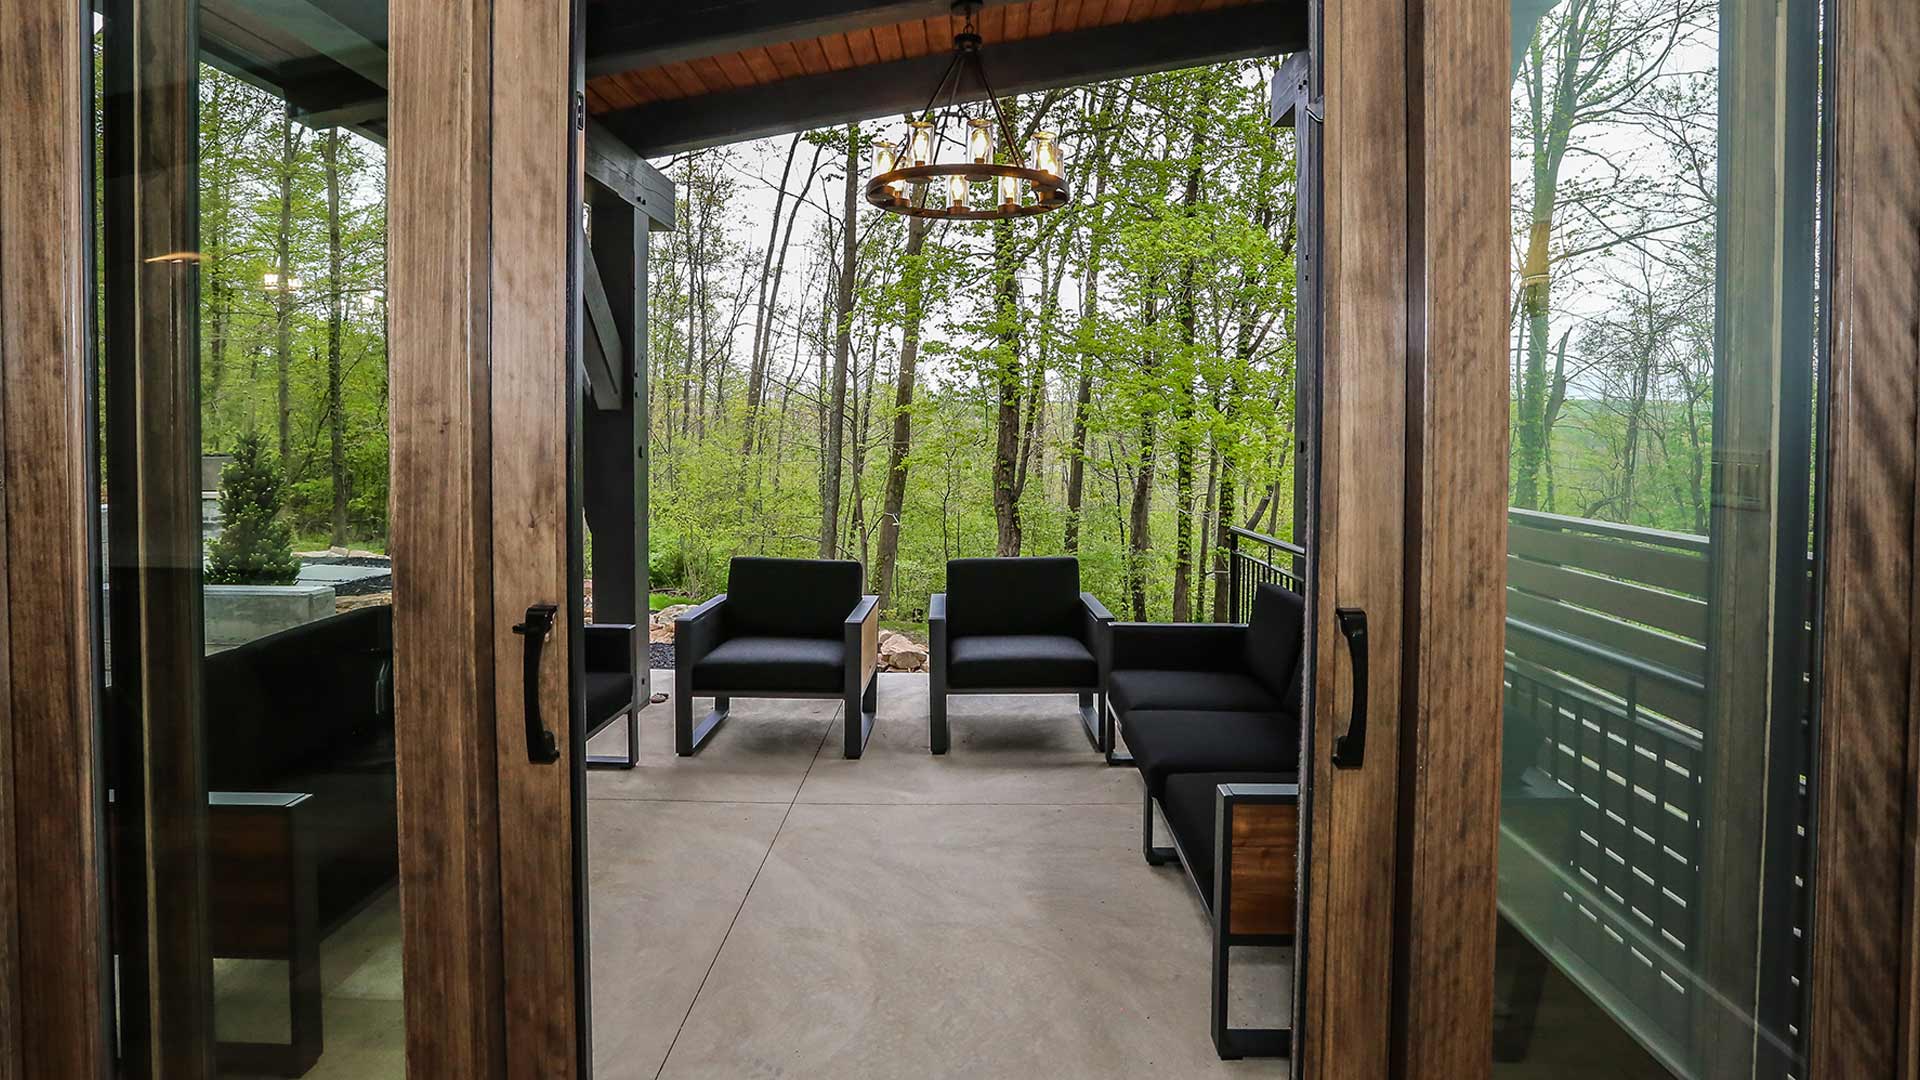 exterior shot of the back deck and yard. There are chairs and a couch on the patio. There is a view of the woods in the background.